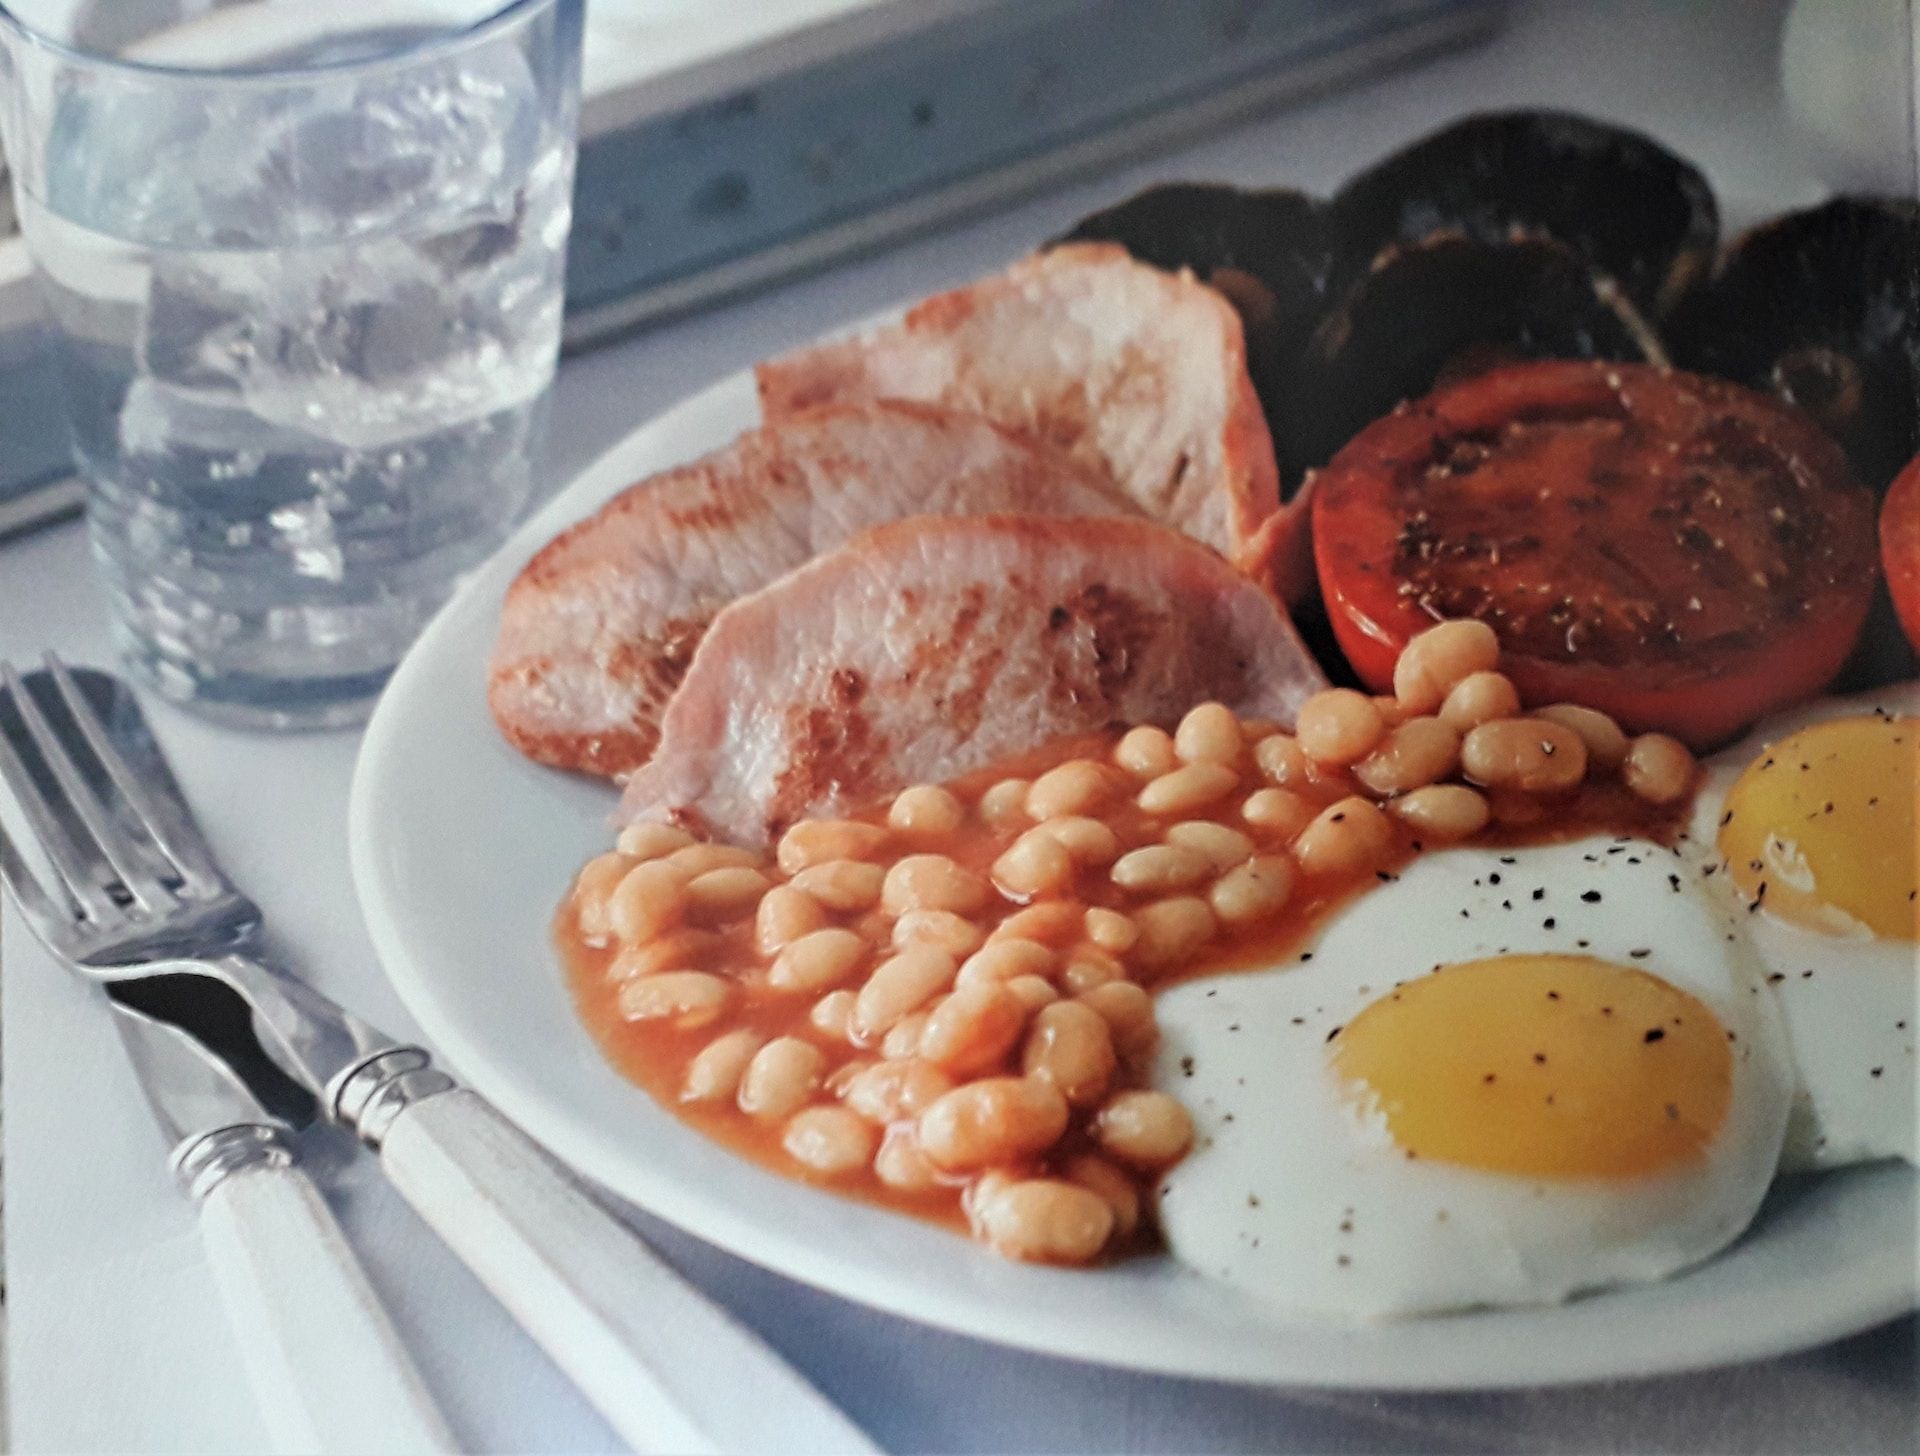 Full english breakfast, a great hangover cure